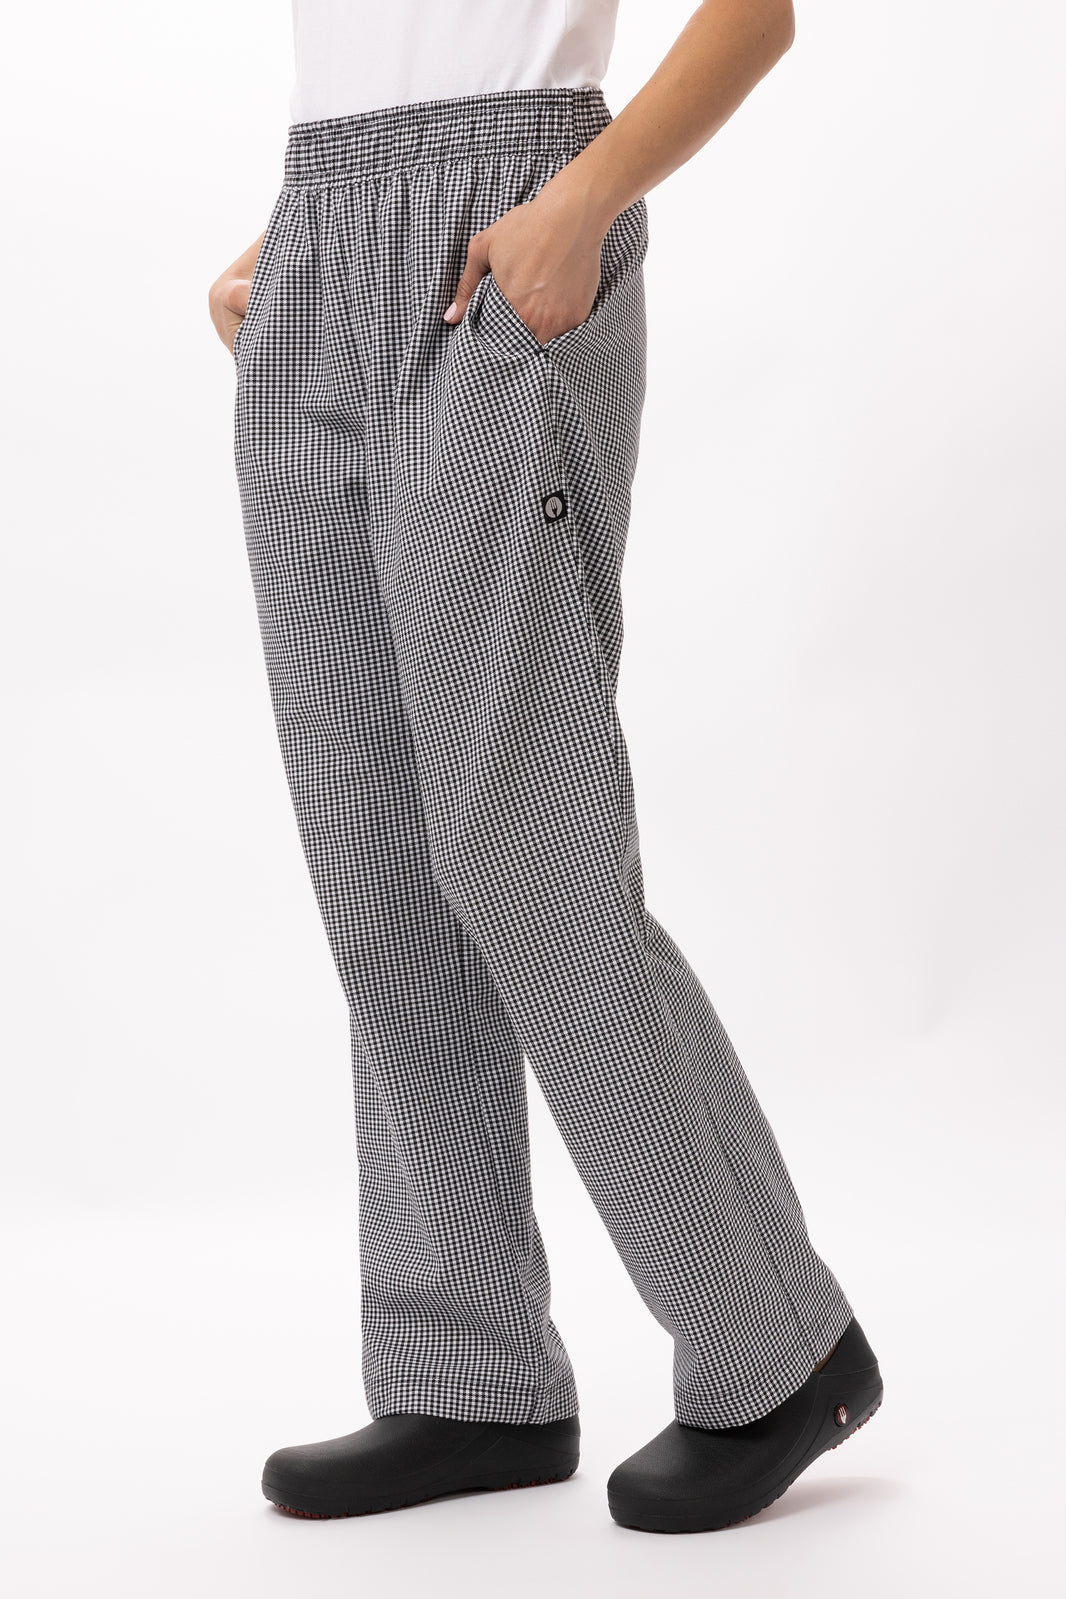 Chef Works Essential Baggy Chef Pants (PW005)